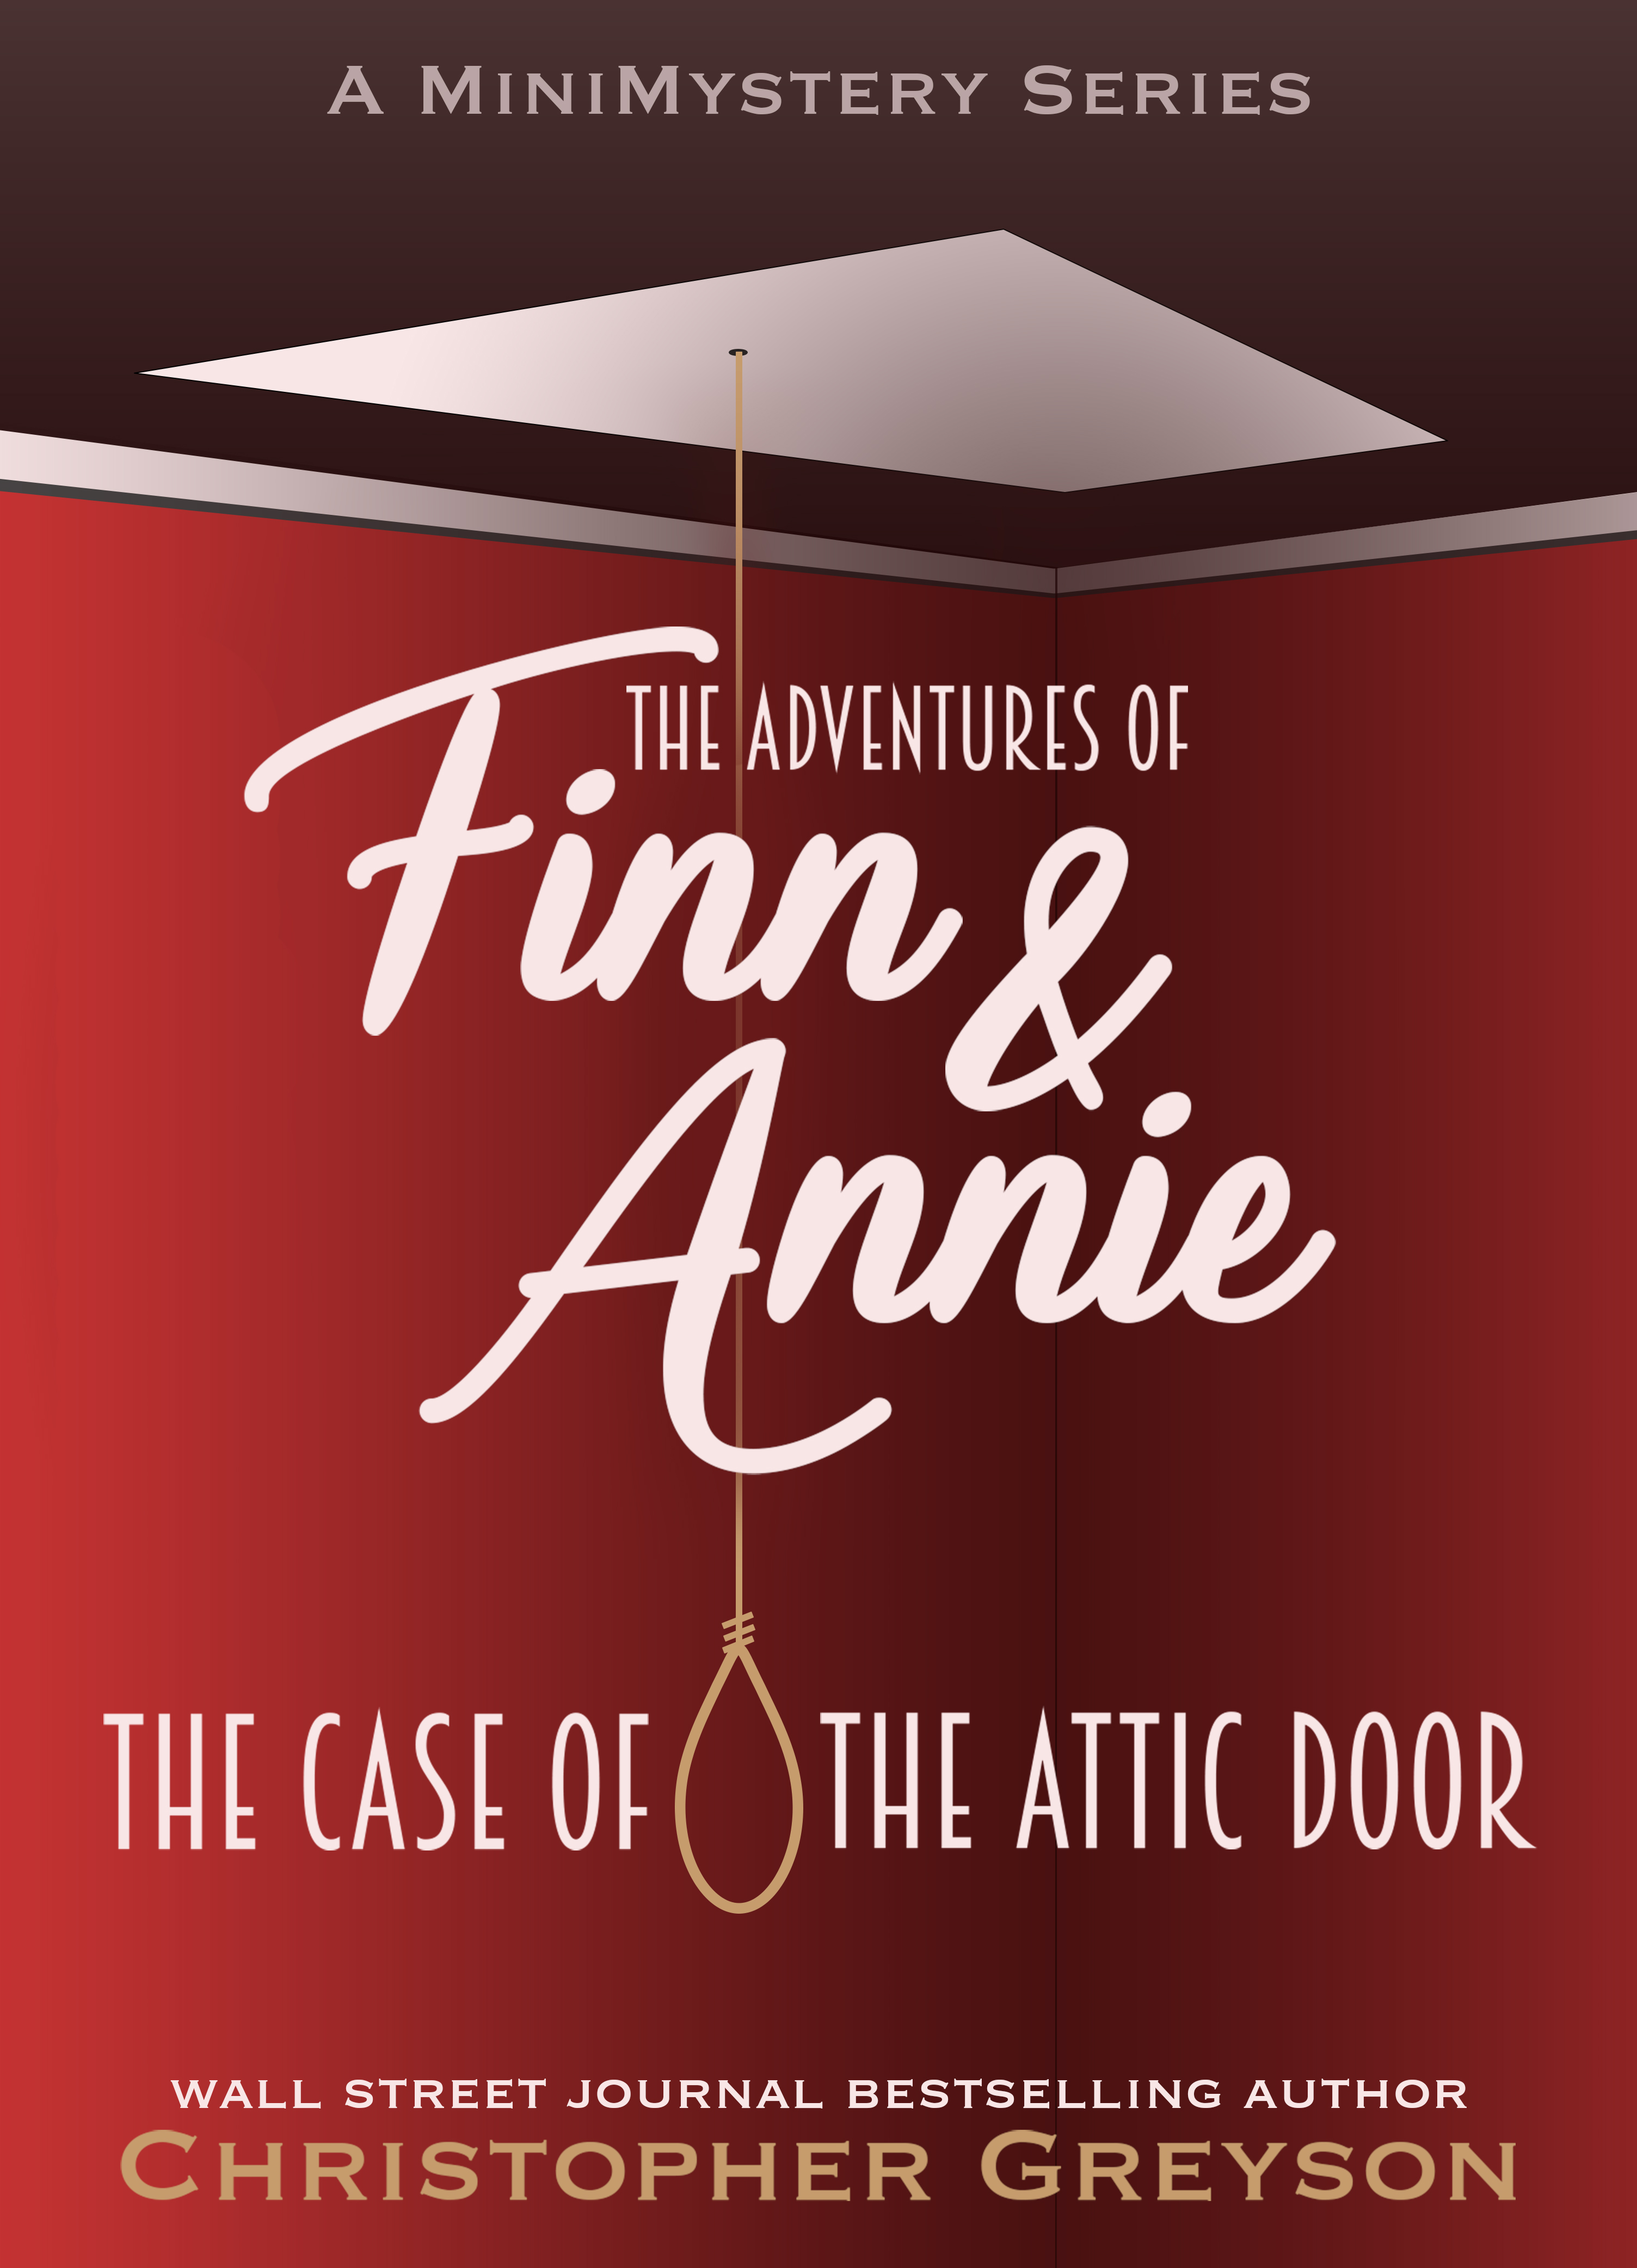 FREE: The Case of the Attic Door by Christopher Greyson